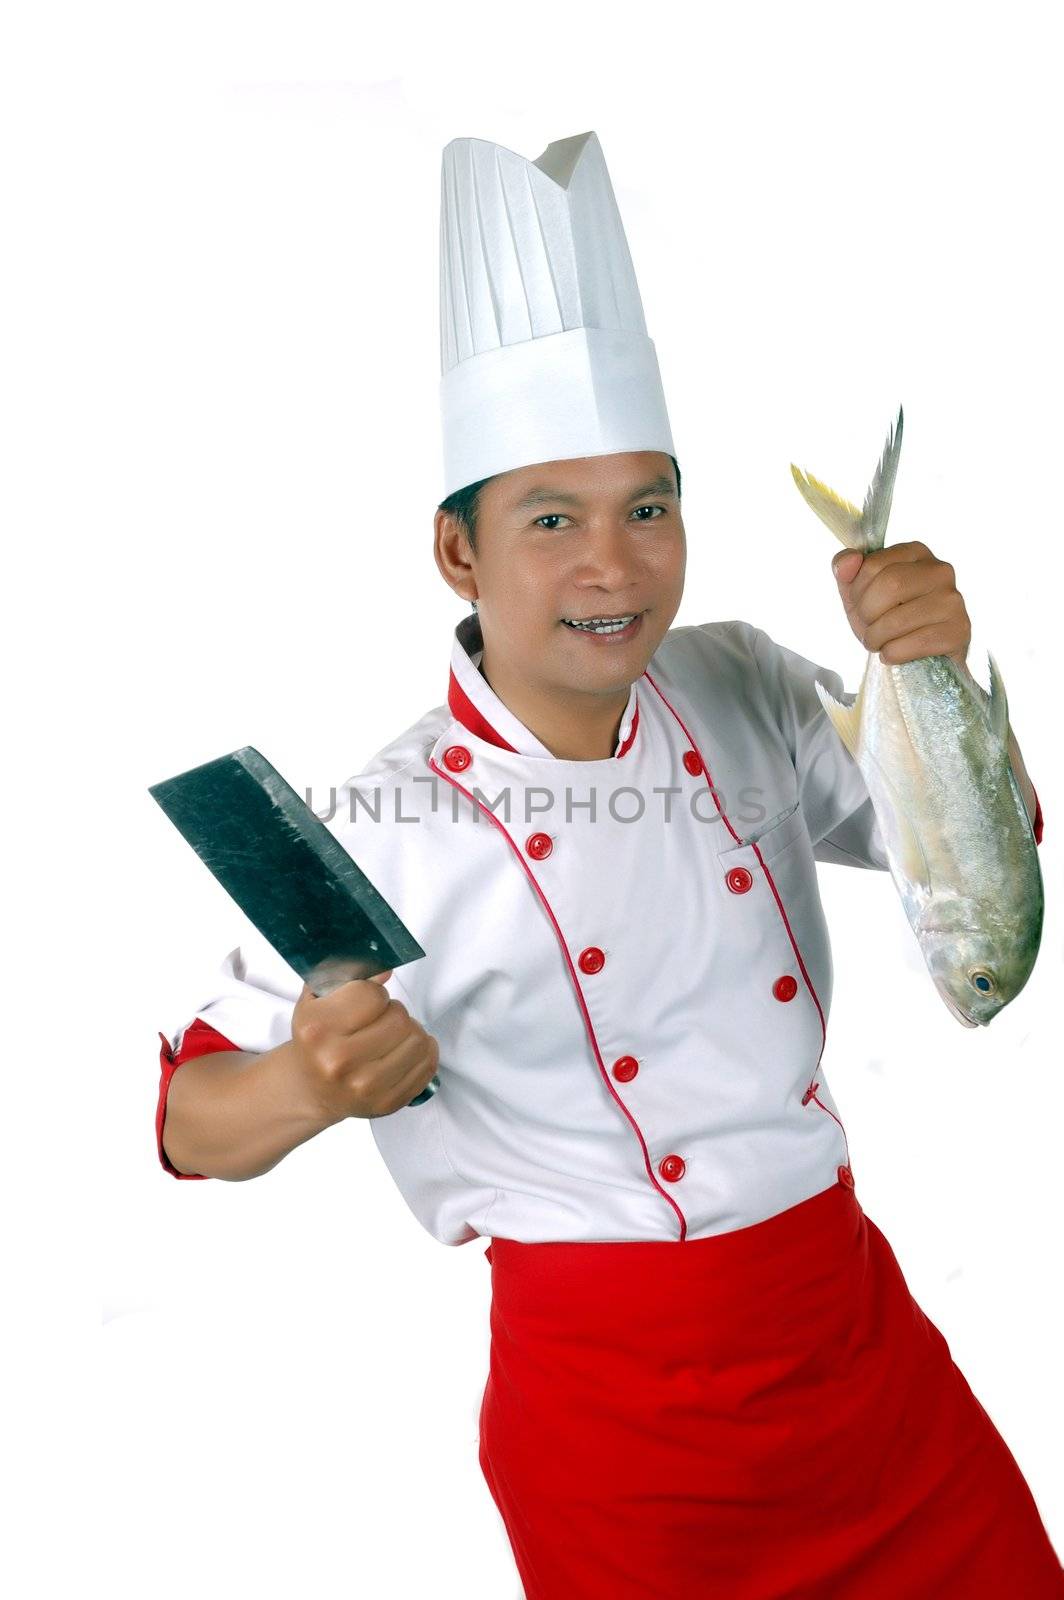 chef holding a big raw fish and kitchen knife isolated on white background